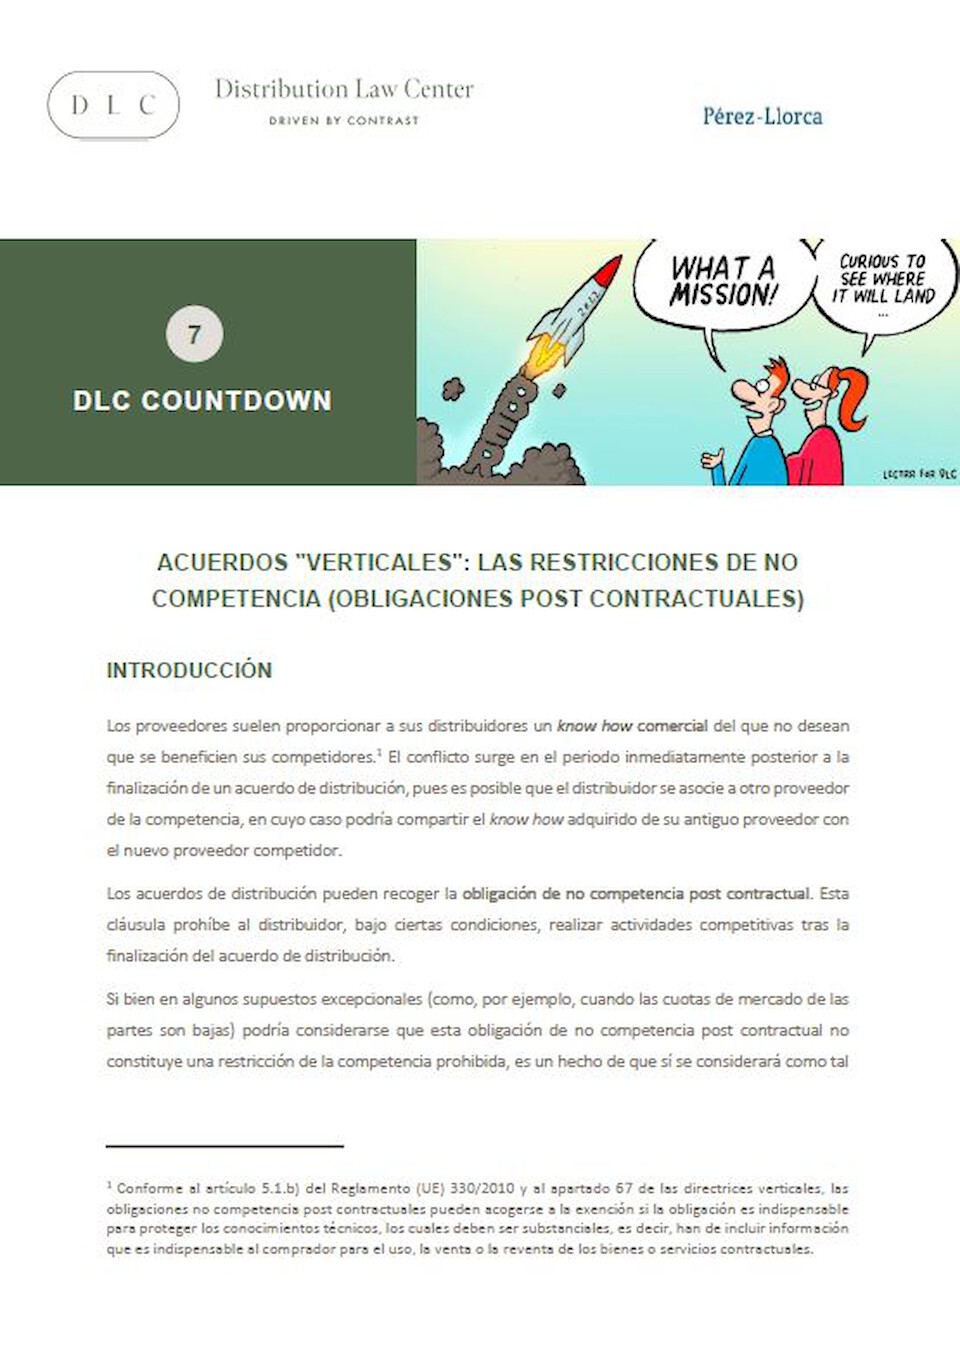 Distribution Law Center Countdown VII - Non-compete restrictions (post term)